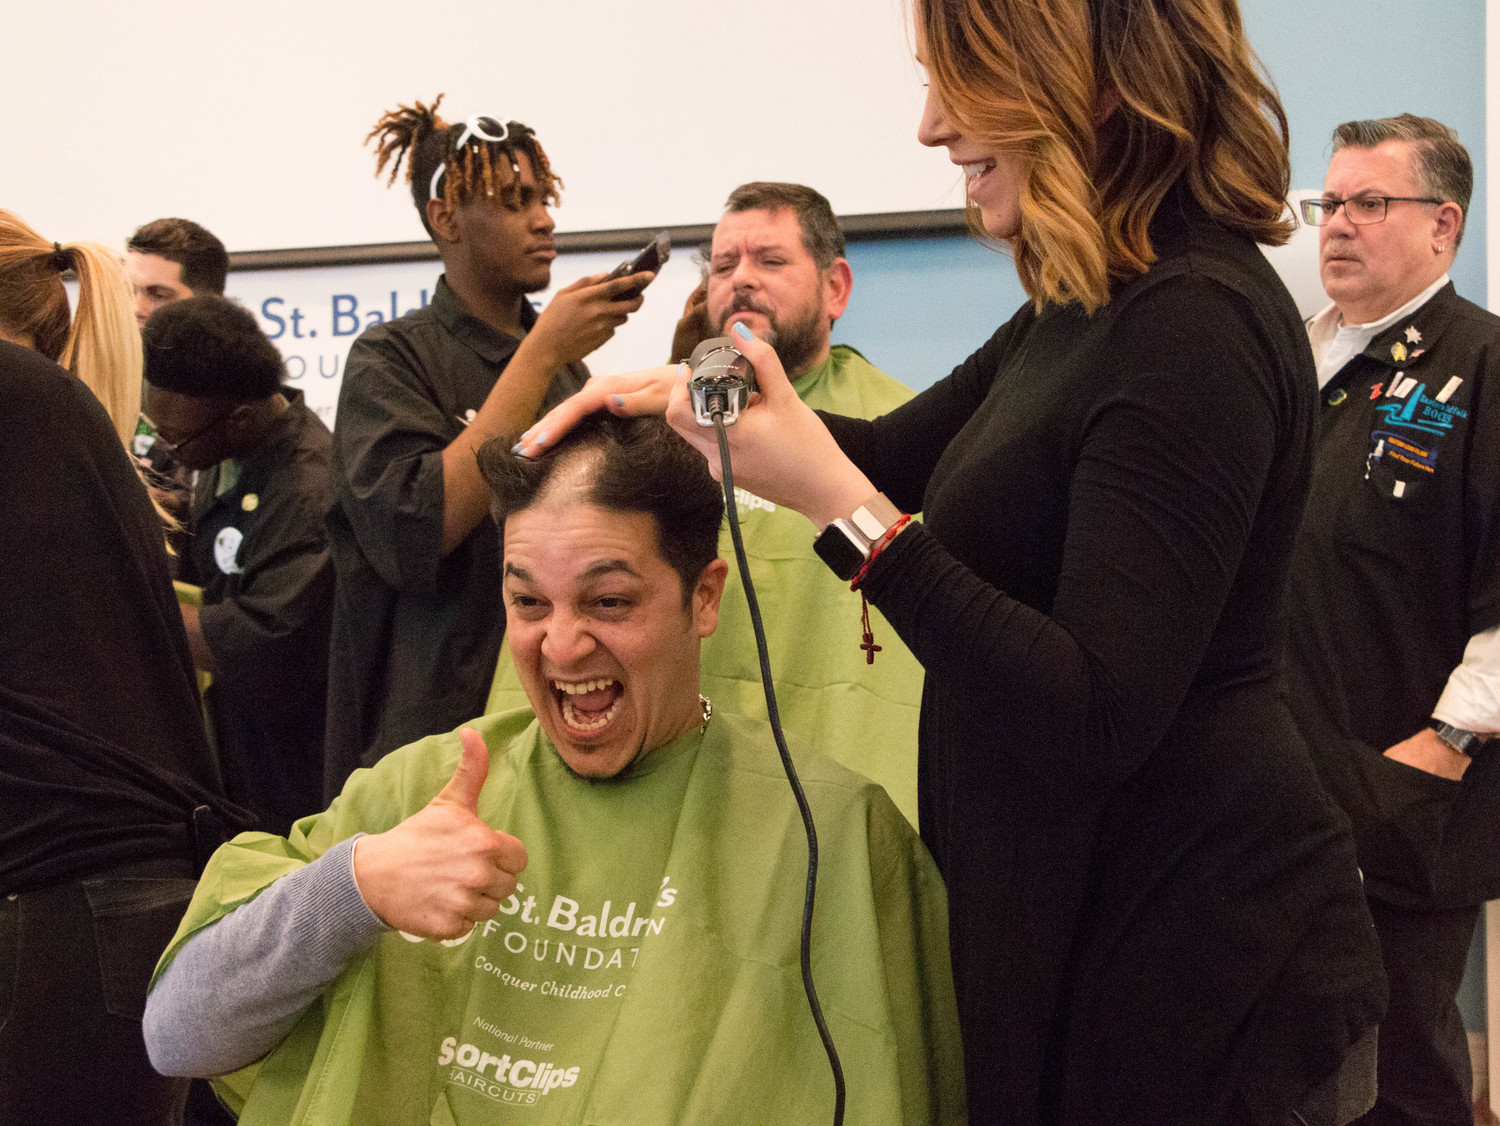 Juan C. Bosques got his head shaved at the St. Baldrick’s fundraiser in Rockville Centre last year, which was attended by more than 200 shavees and ponytail donators and helped raise about $450,000.